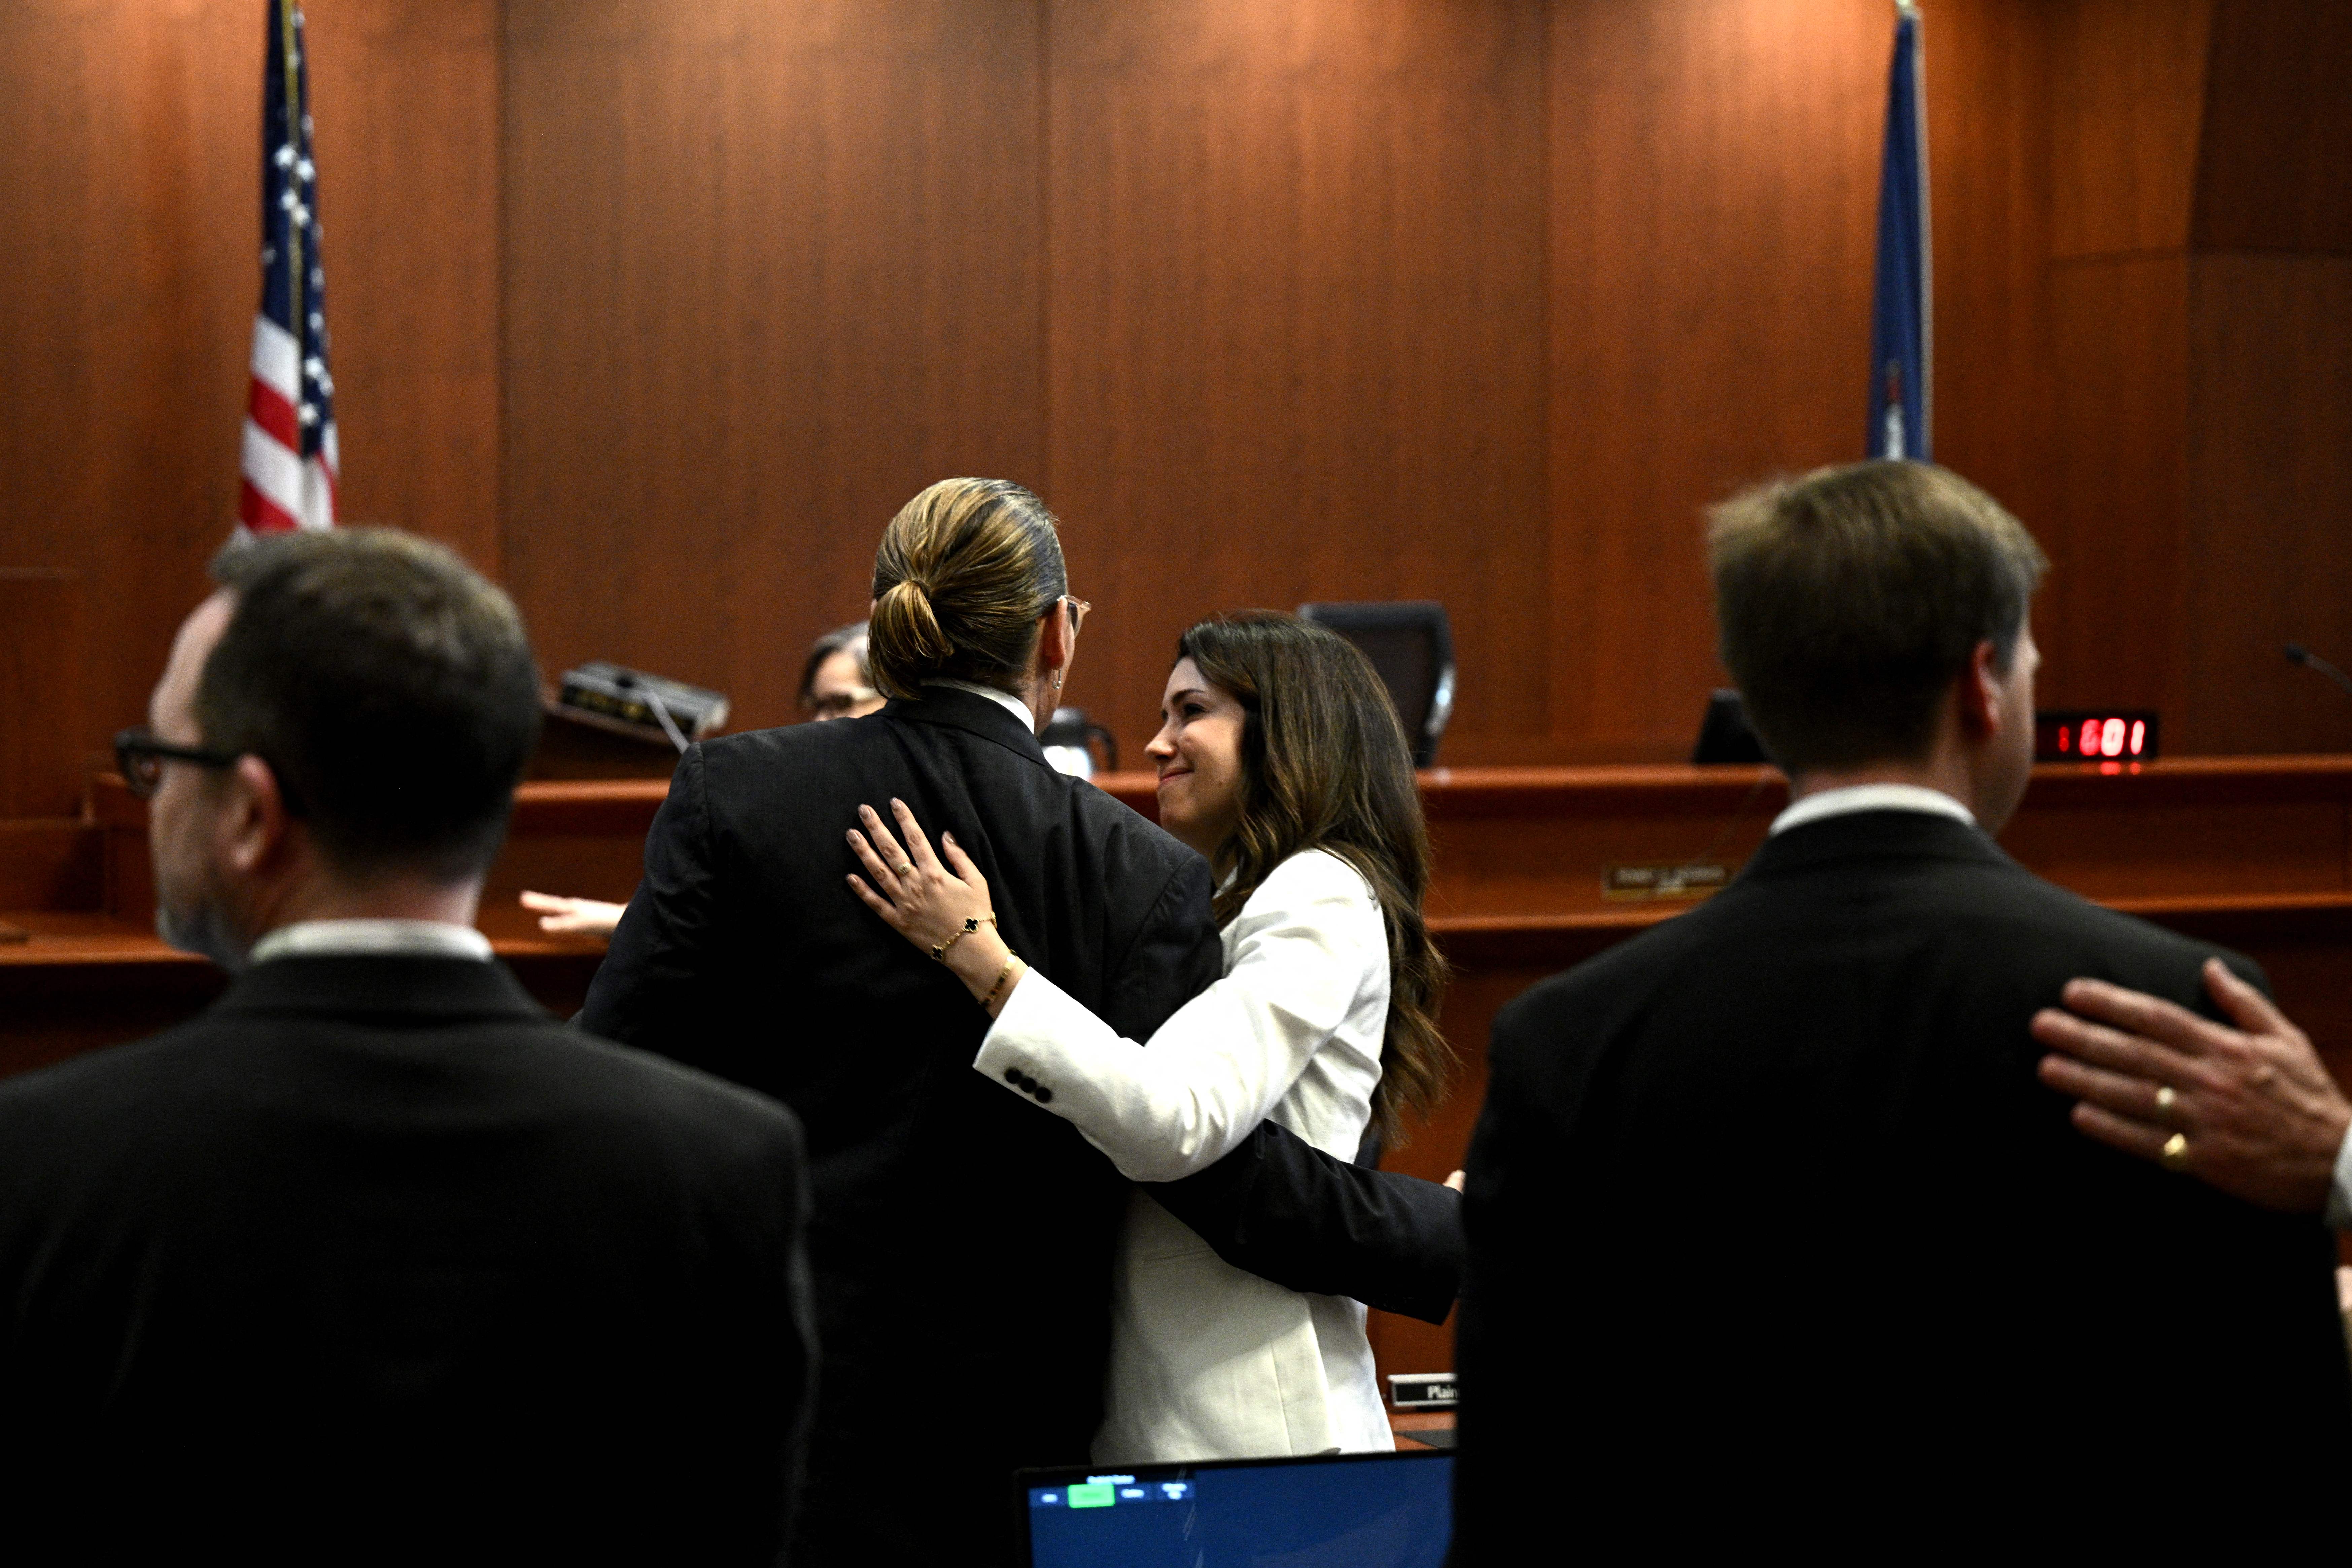 Attorney Camille Vasquez embraces US actor Johnny Depp in the courtroom at the Fairfax County Circuit Courthouse in Fairfax, Virginia, on May 17, 2022.